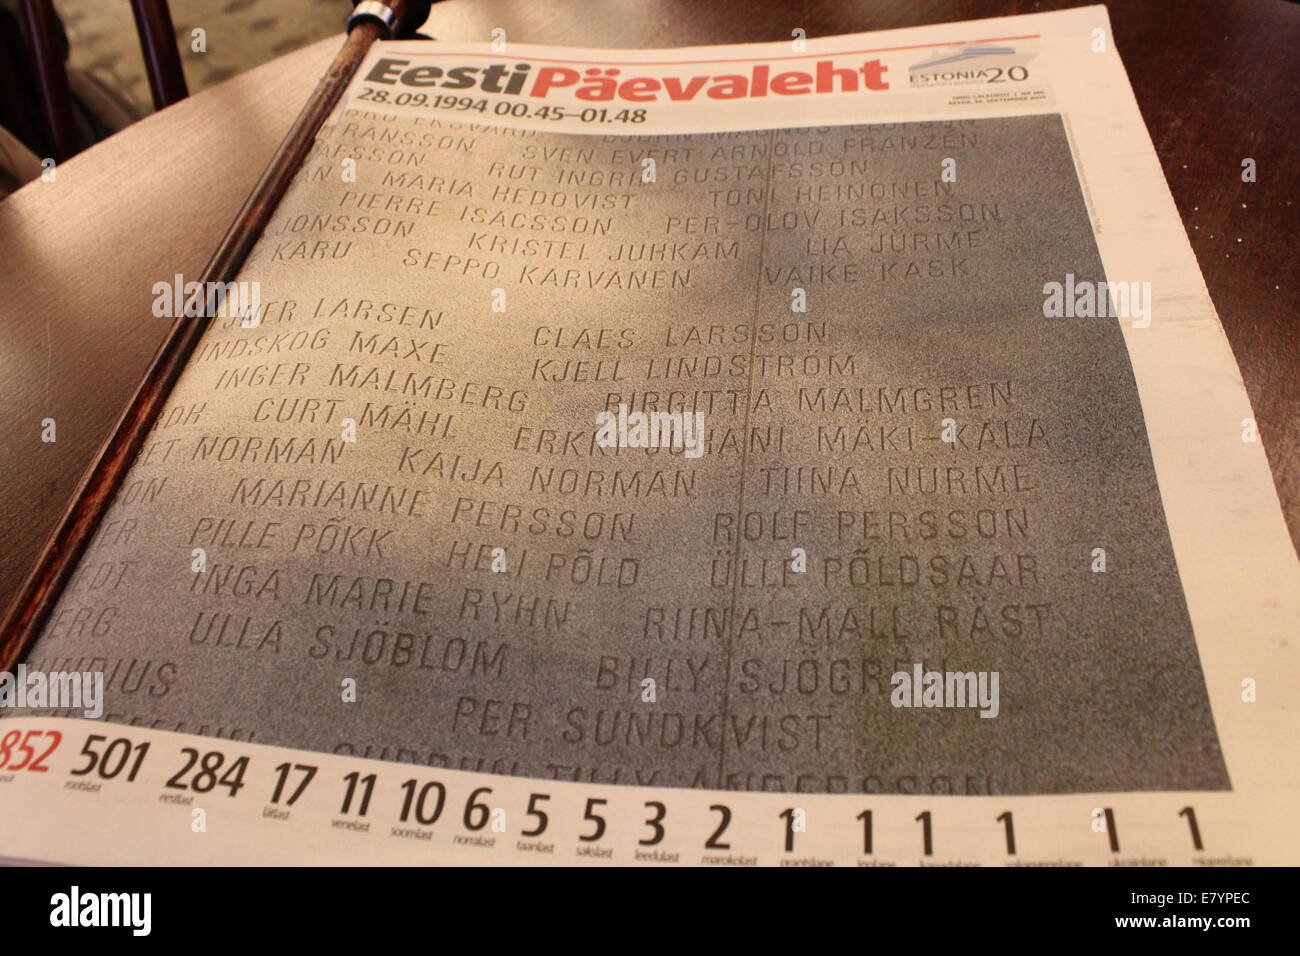 Twenty years after Estonia shipwreck front page with names of victims printed on news paper Eesti Päevaleht in Tallinn Stock Photo